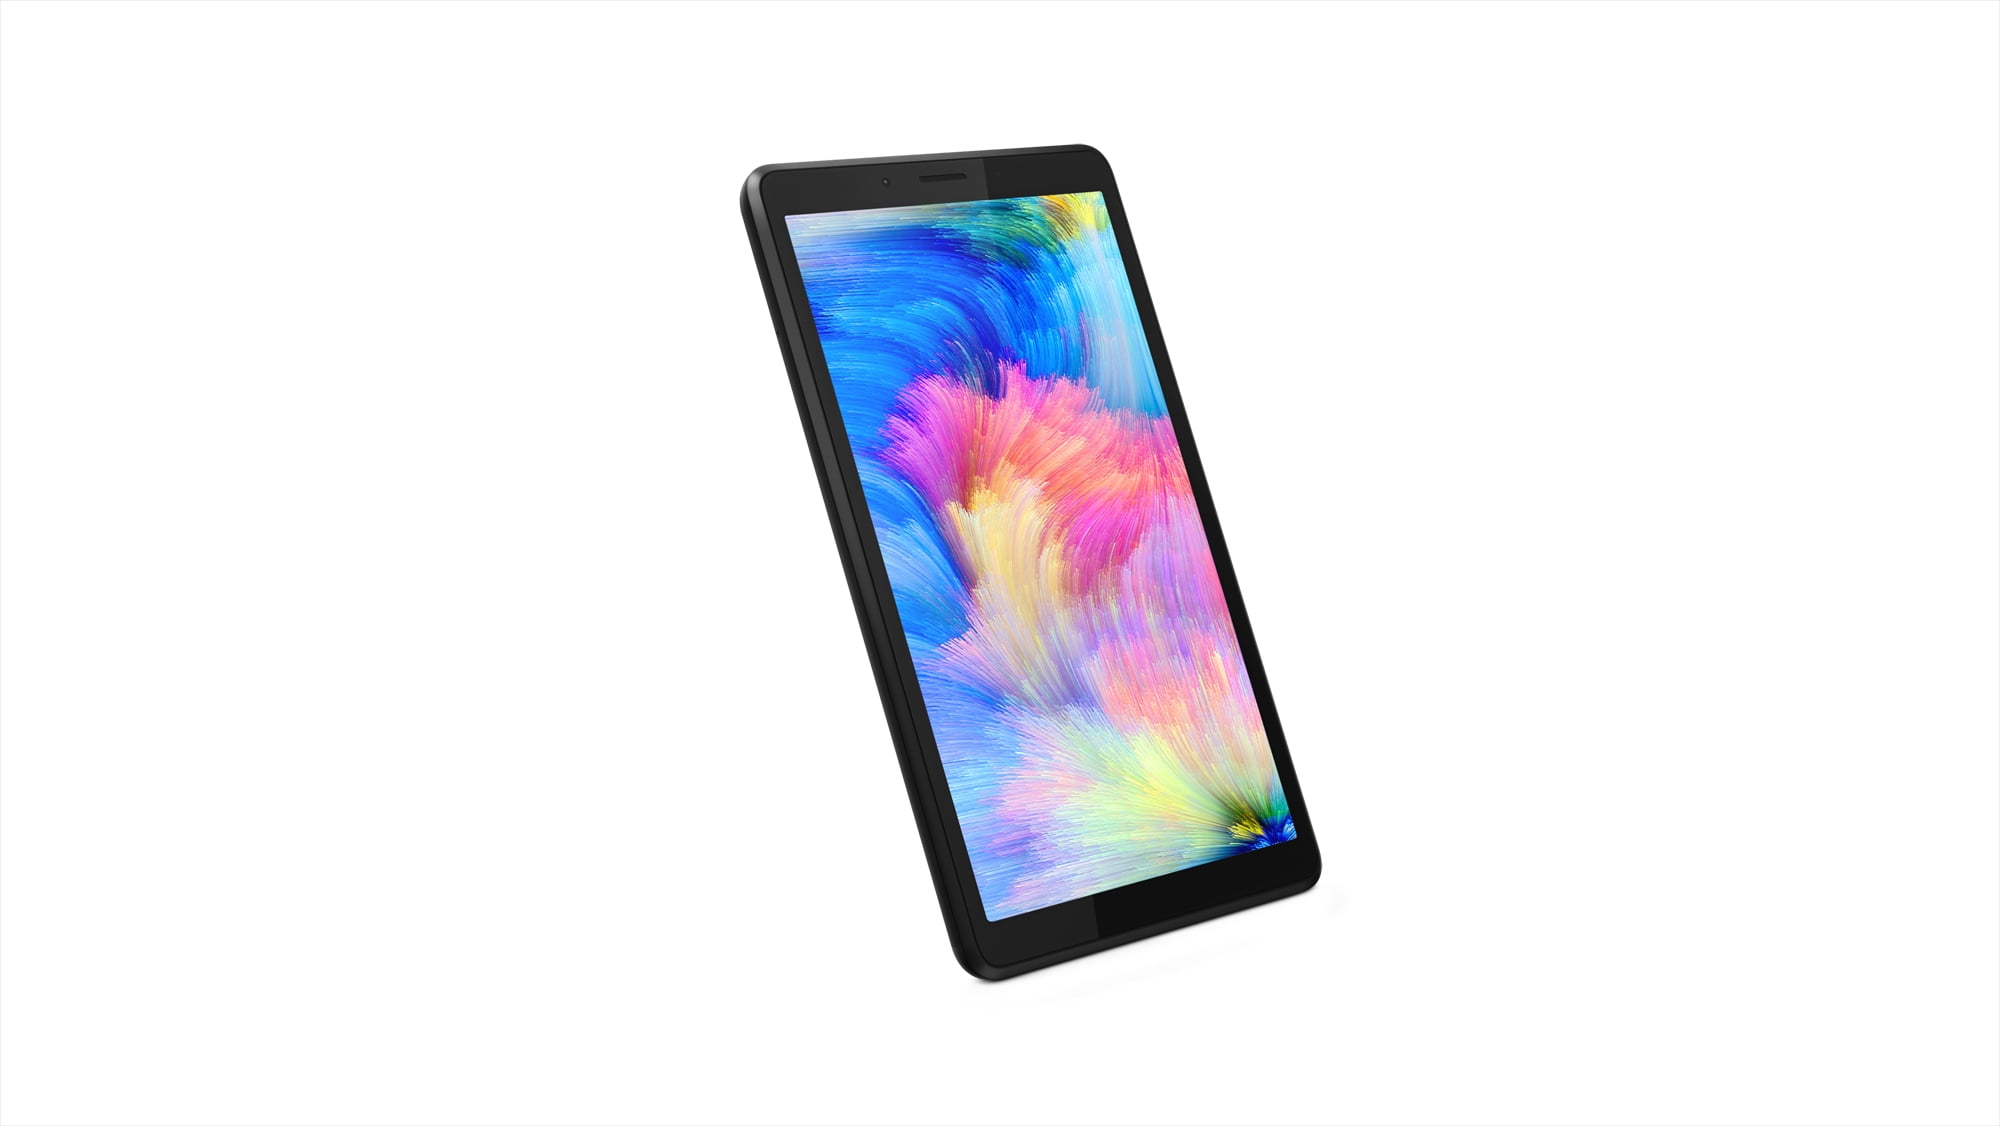 LENOVO Tablette tactile 7'' 2Go 32Go wifi Android TAB M7